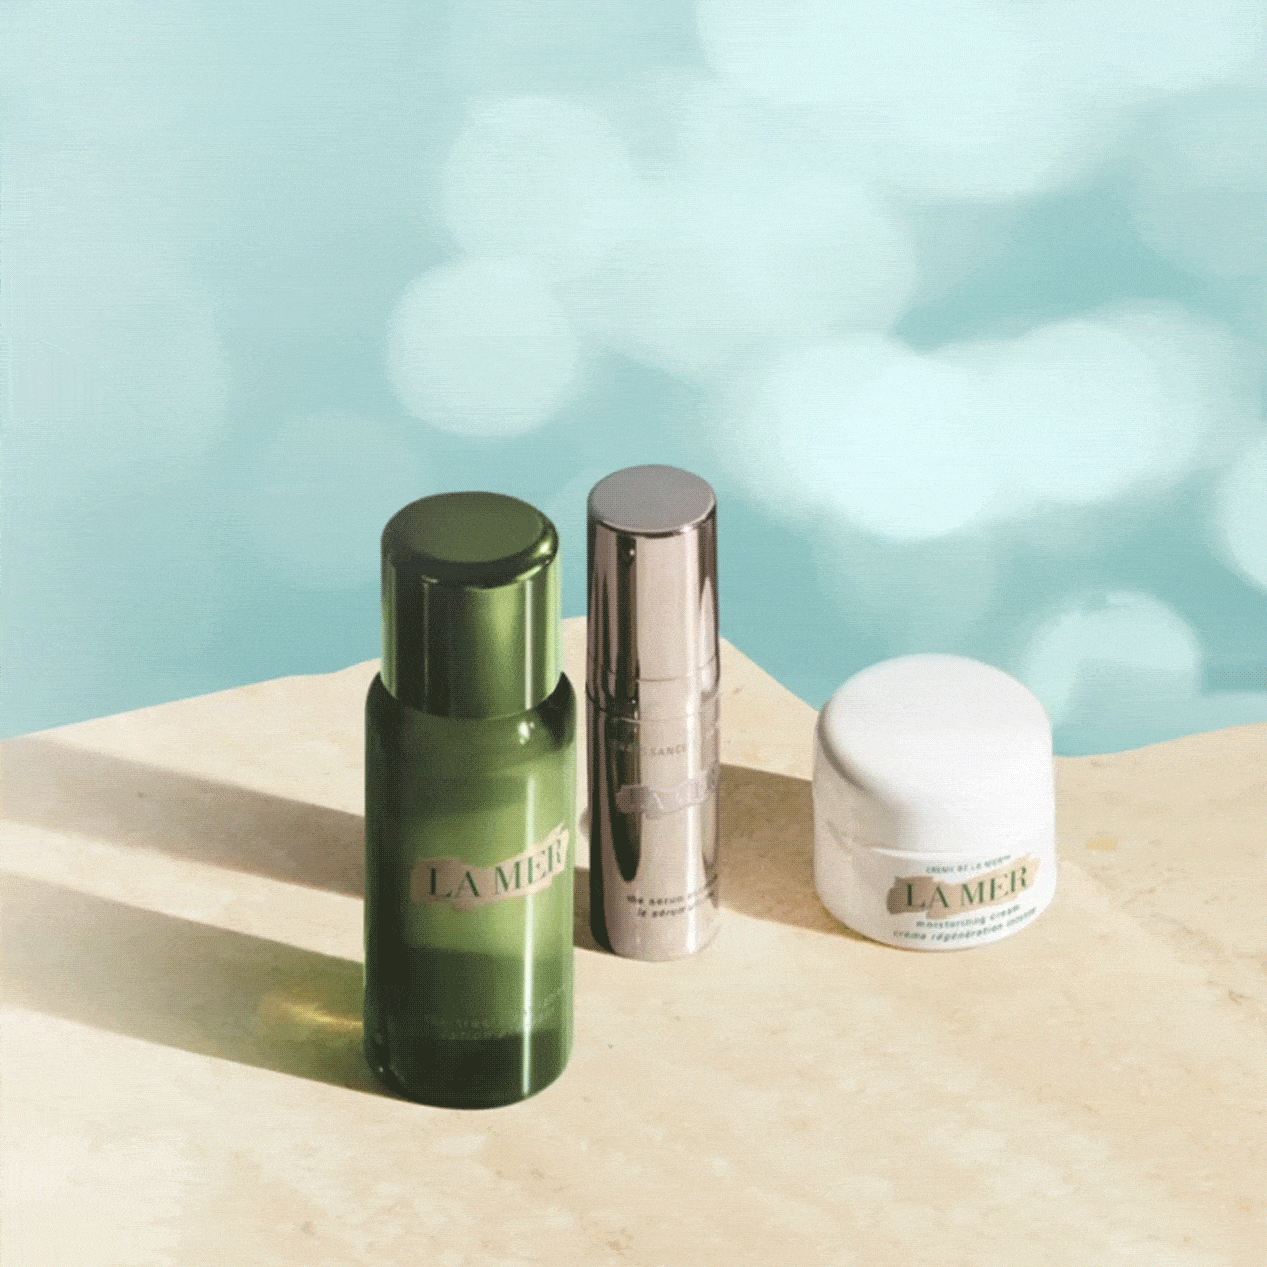 La Mer: Luxurious gift trio with $300 | Milled